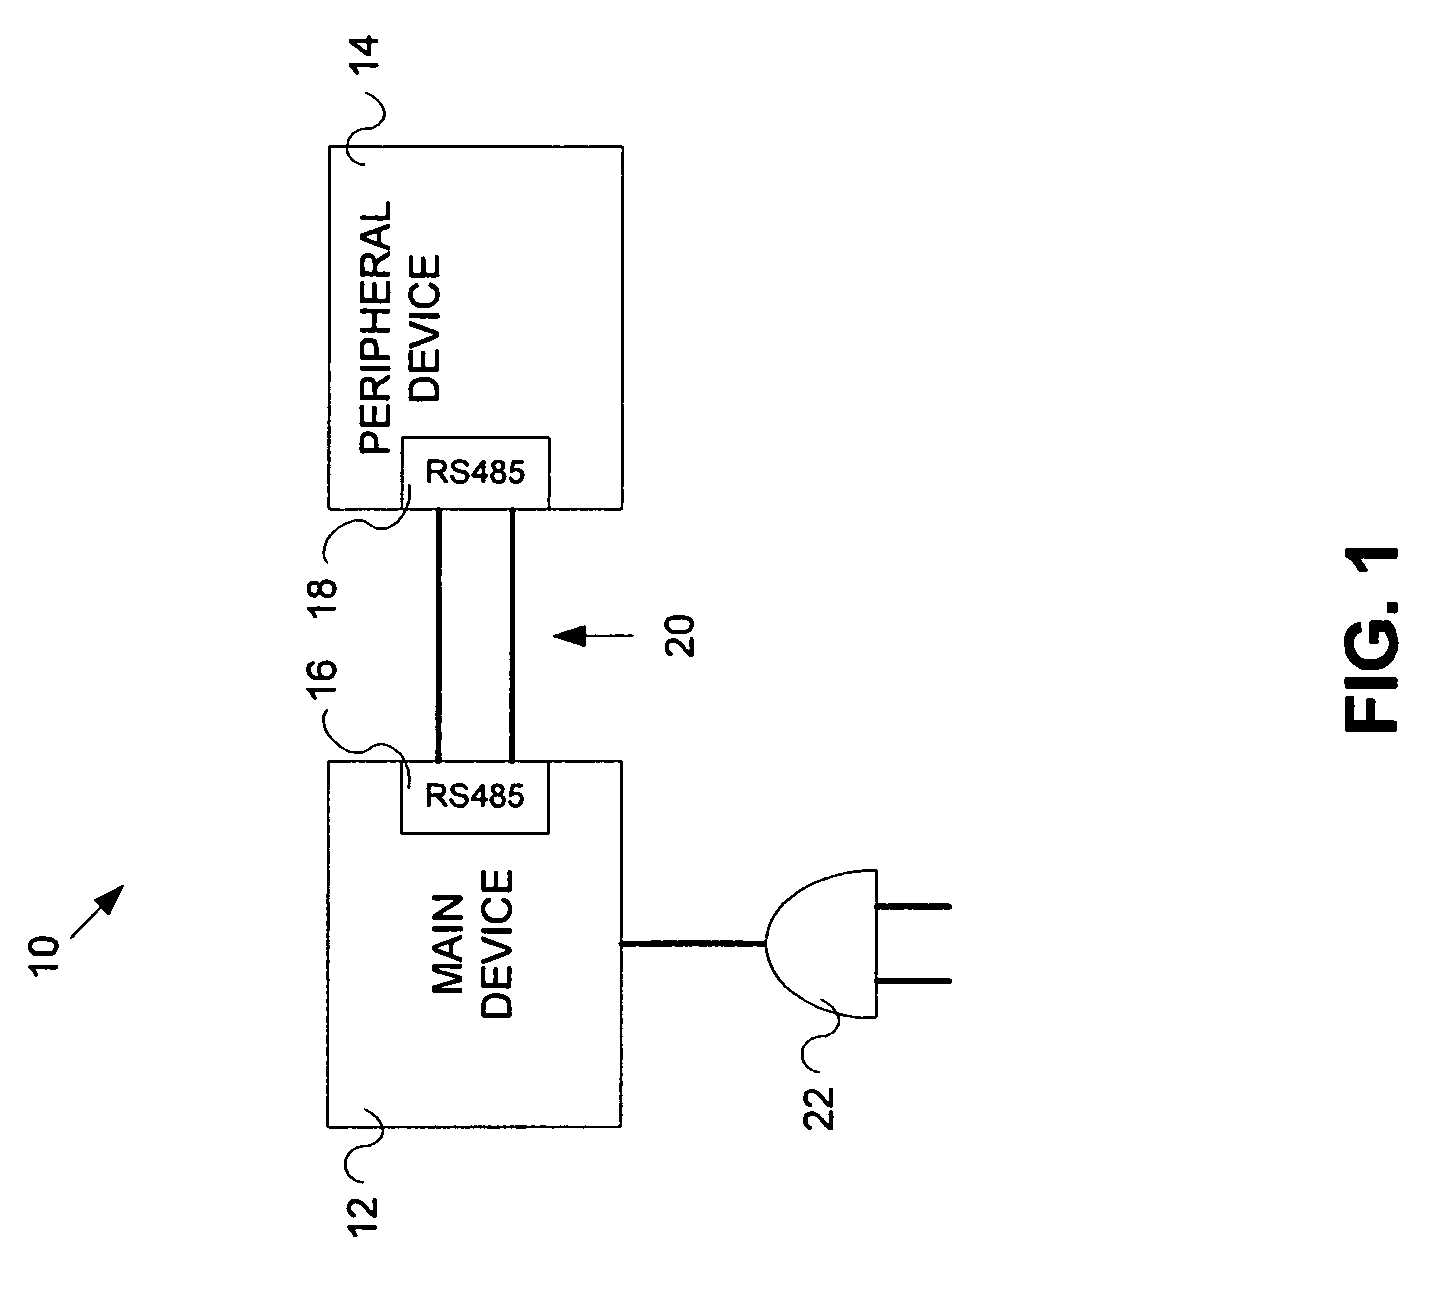 Method and system for powering a device using a data communications signal line